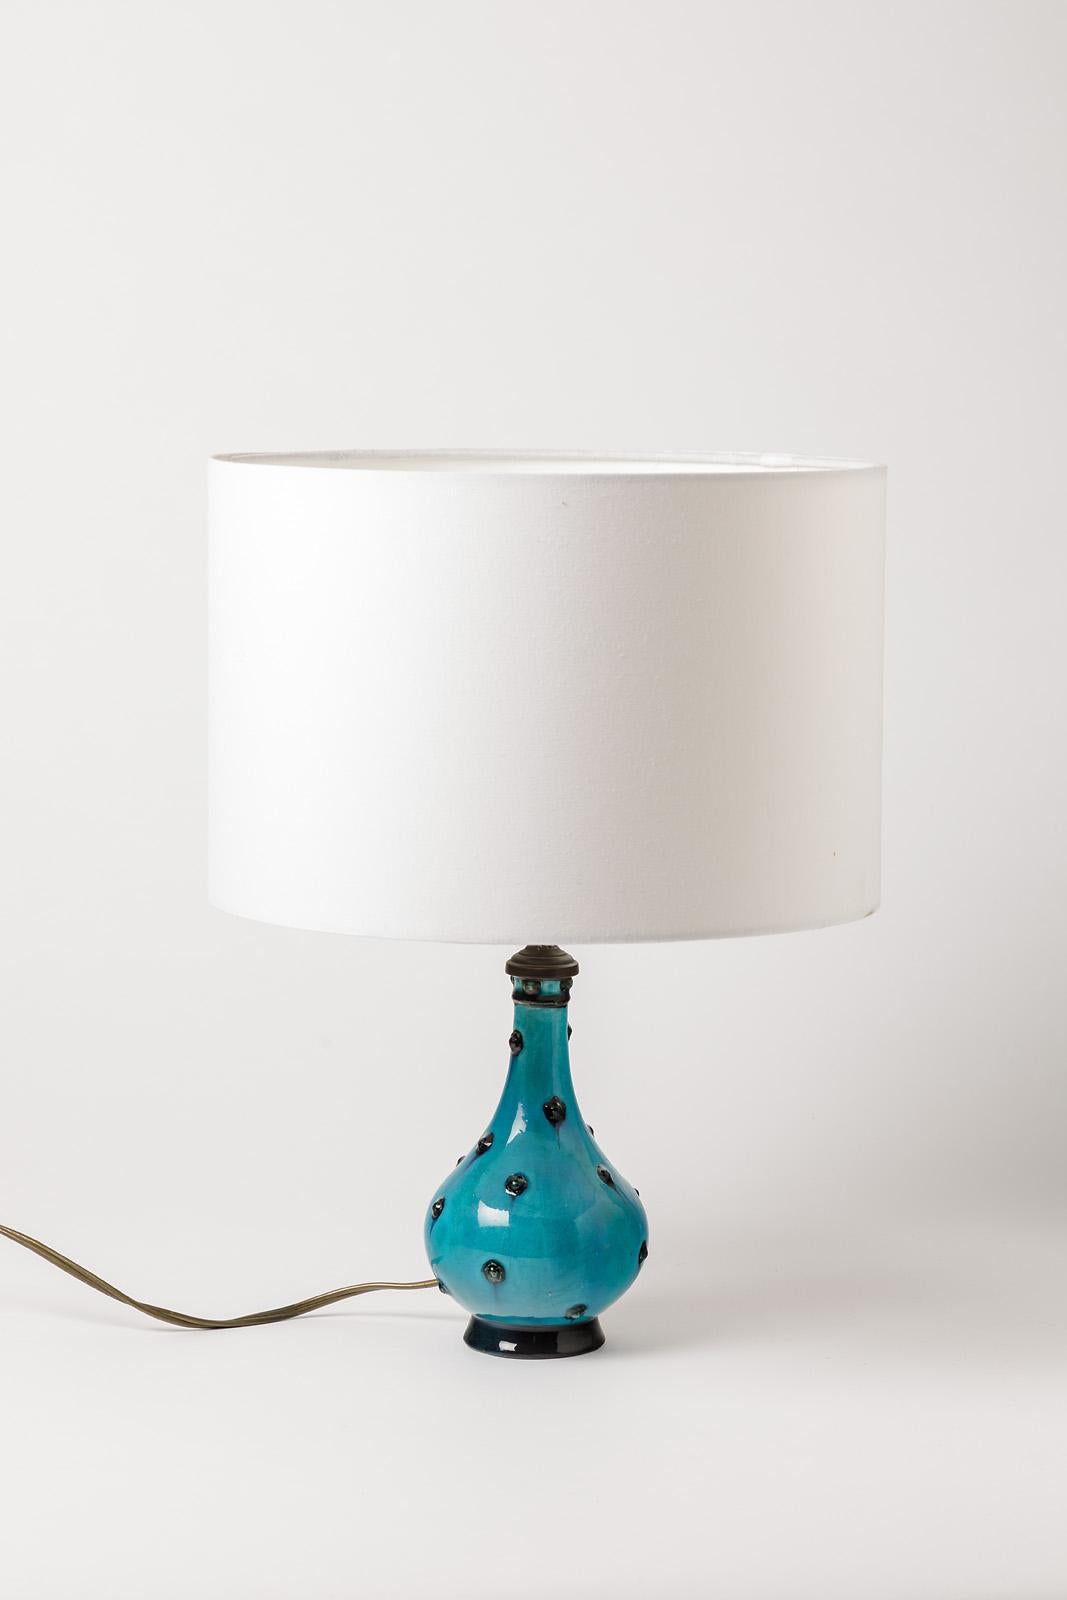 20th Century Decorative Blue and Black Art Deco Ceramic Table Lamp by Lachenal, 1930 For Sale